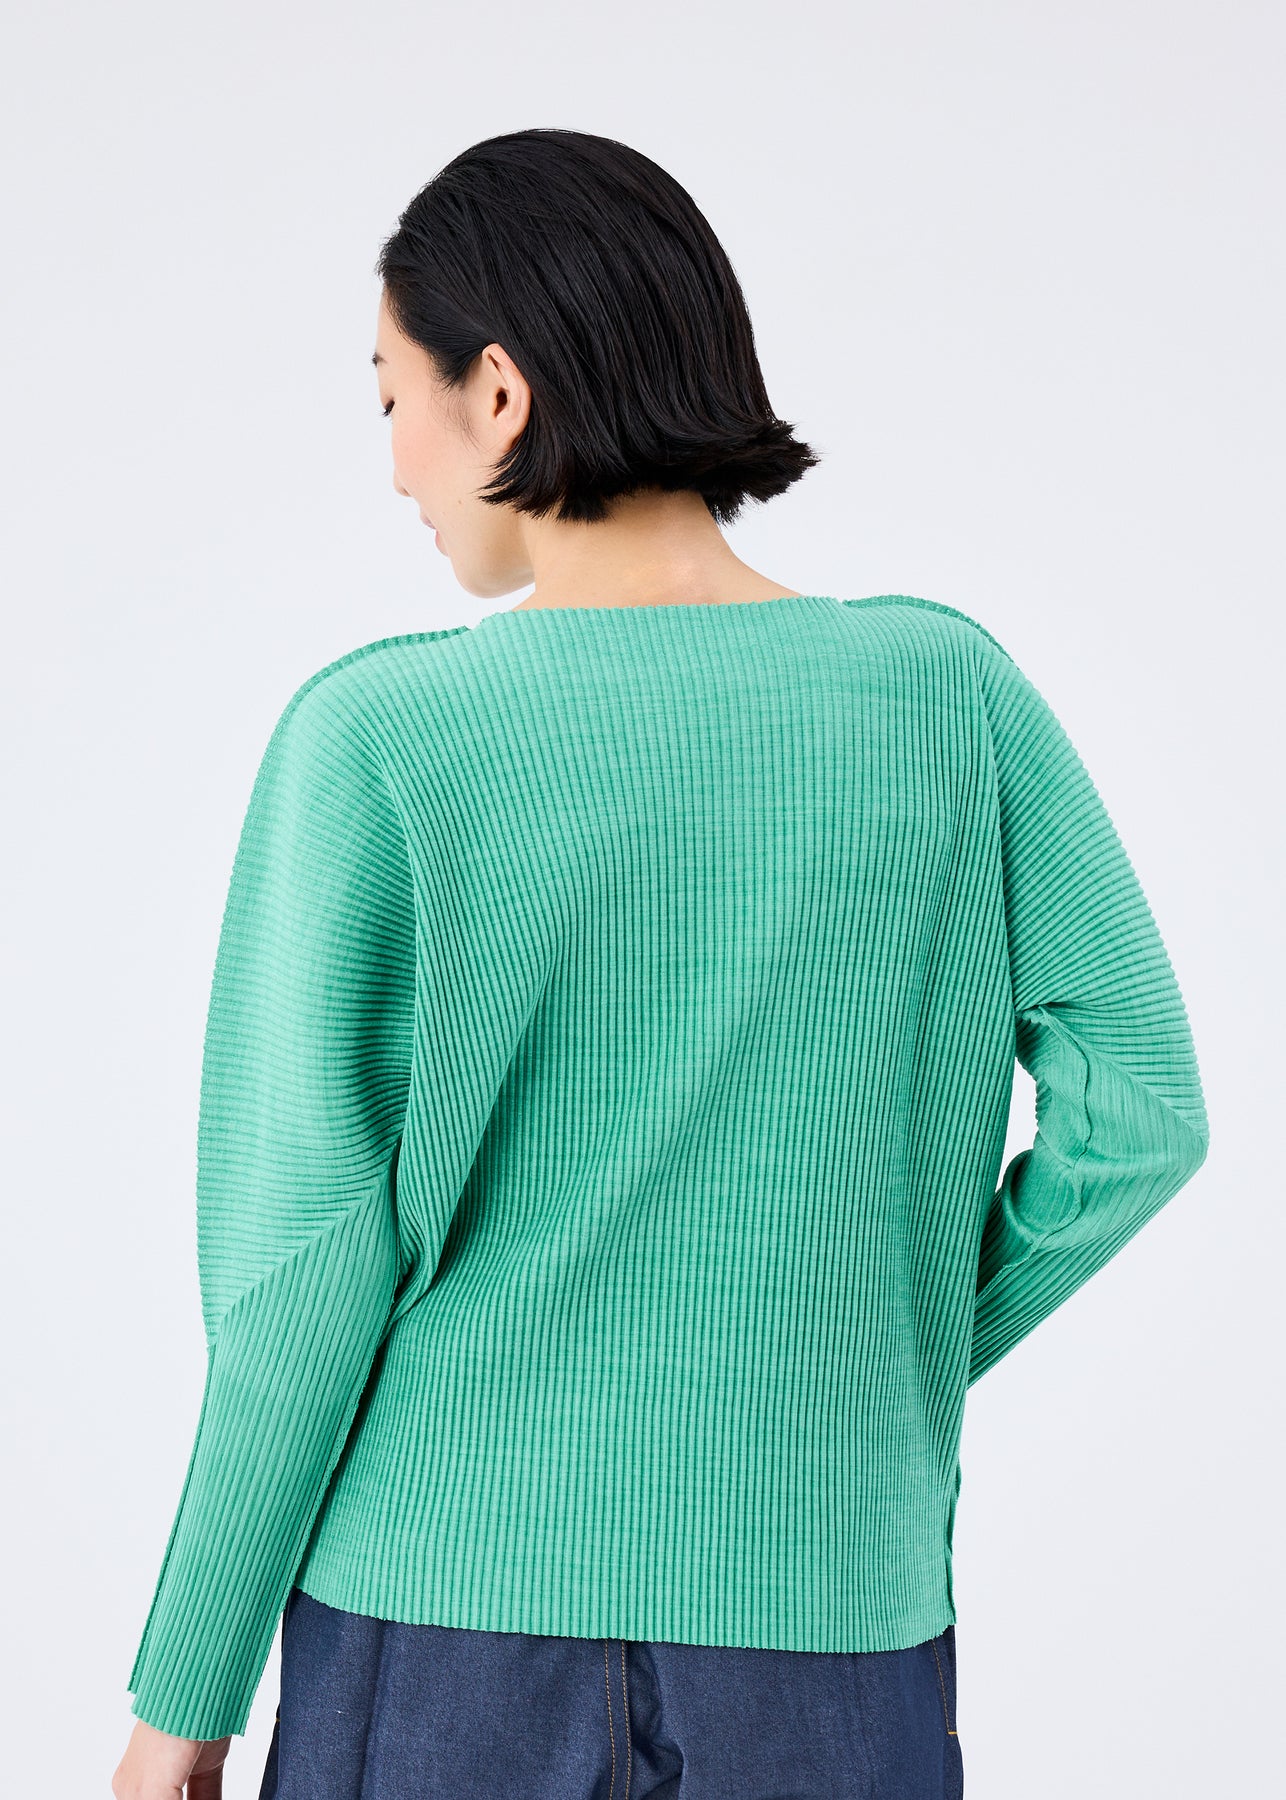 MIX FINE KNIT PLEATS TOP | The official ISSEY MIYAKE ONLINE STORE 